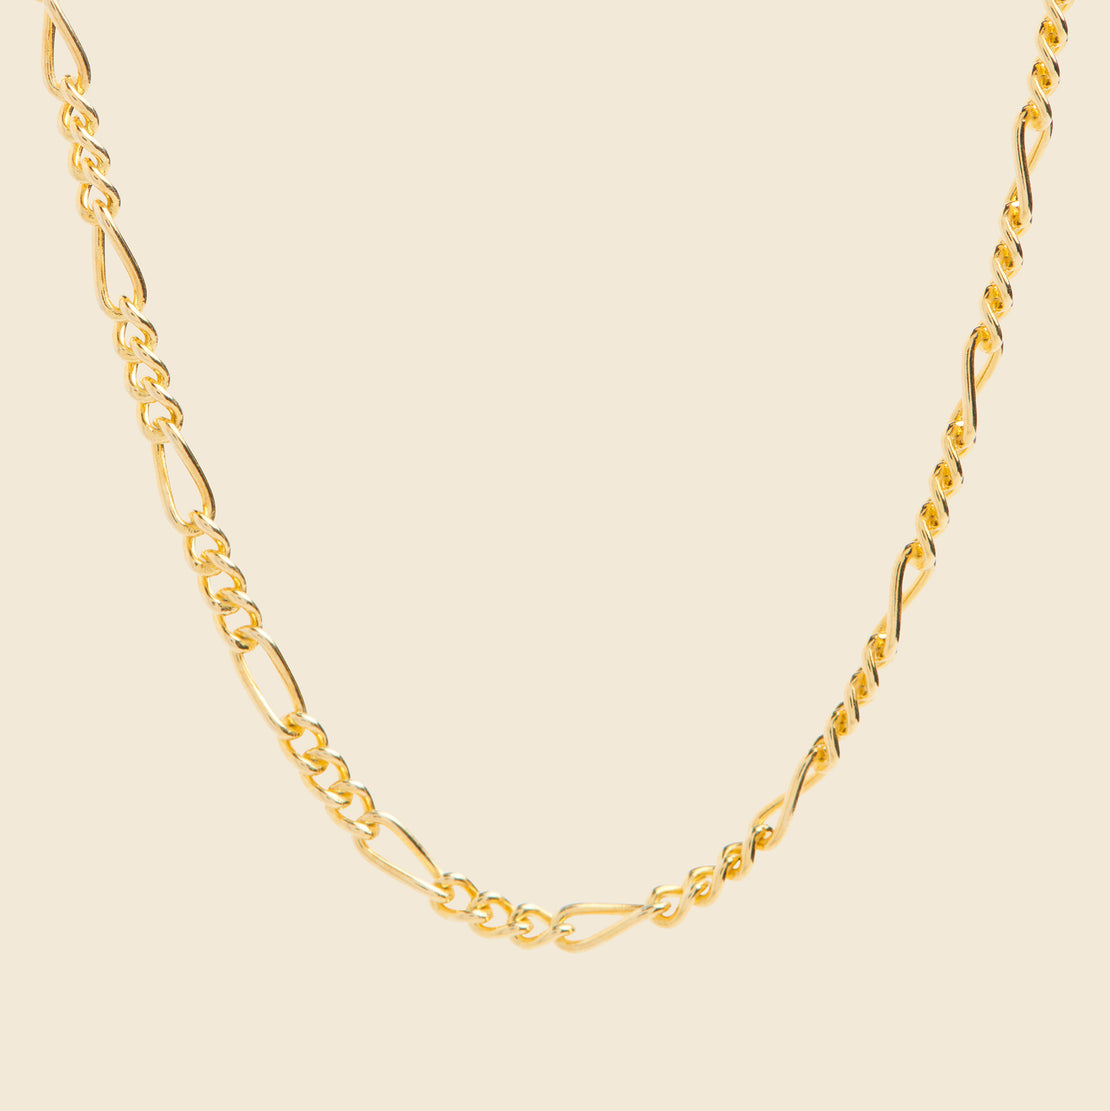 Figaro Chain Necklace - Gold Vermeil - Miansai - STAG Provisions - Accessories - Necklaces